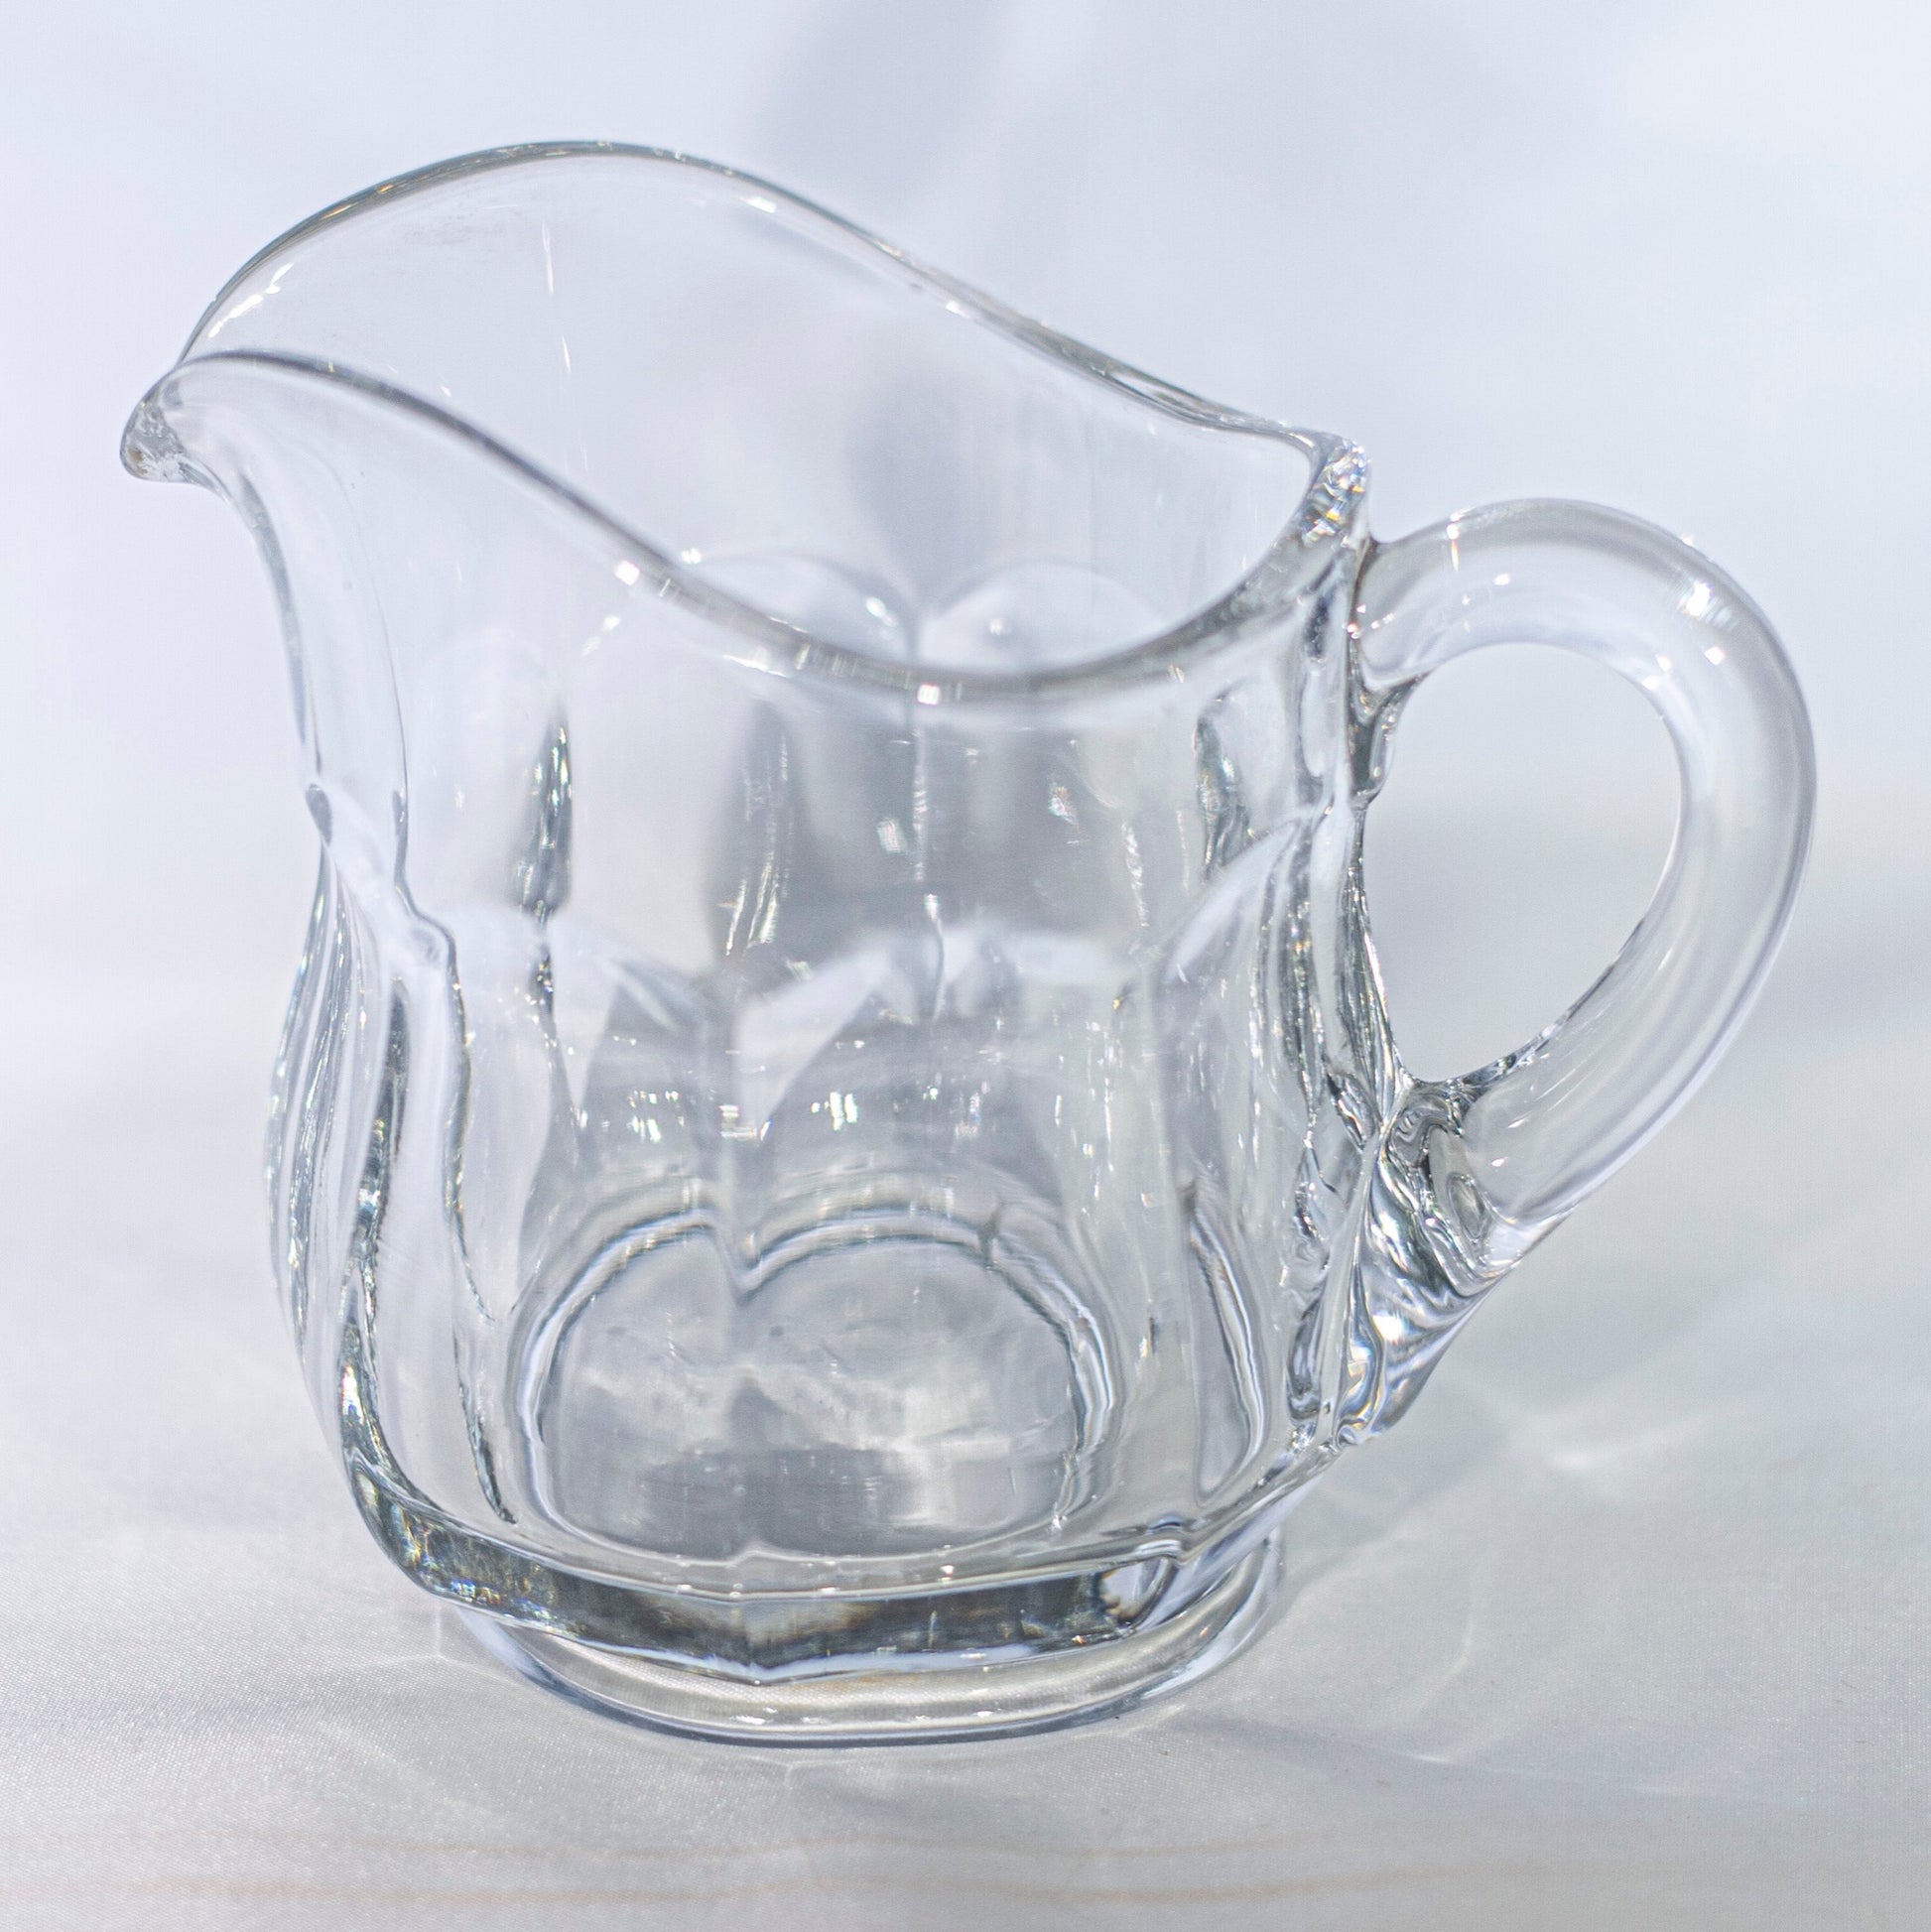 Small Drinking Glasses With Sphere Handle, Small Teacup, Creamer